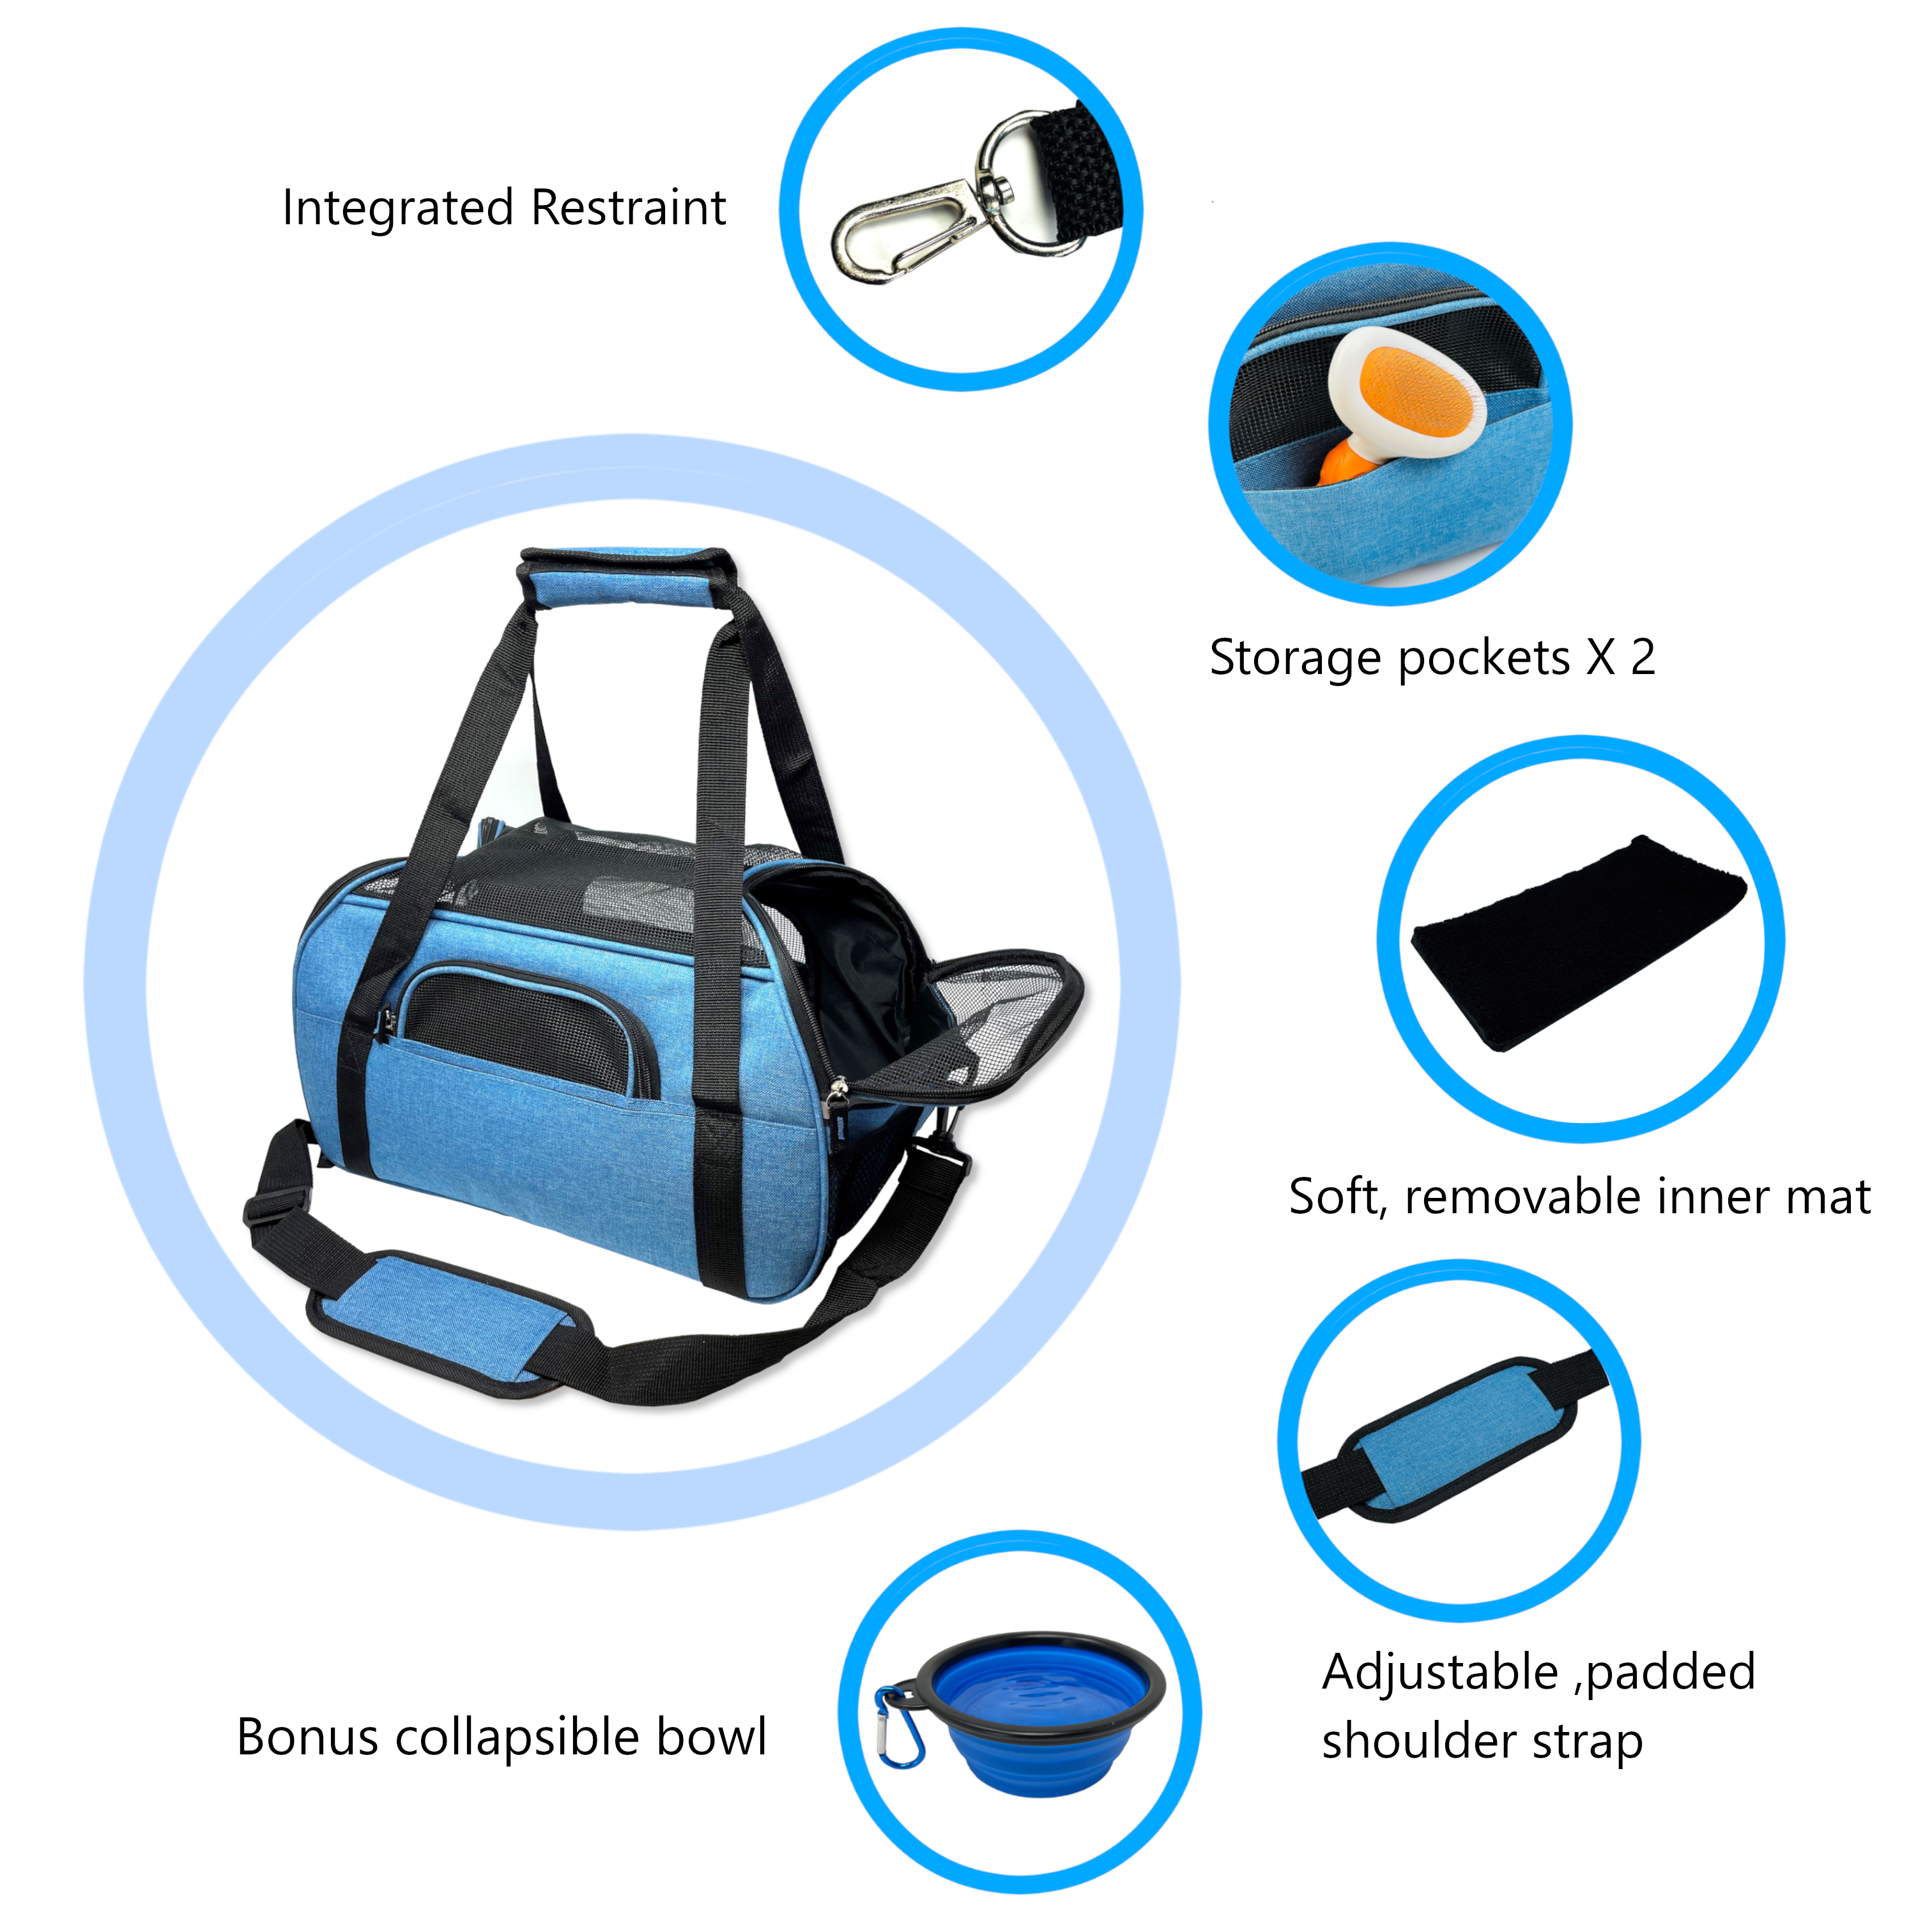 Breathable Zippered Mesh Airline Approved Carrier for Small Dogs or Cats